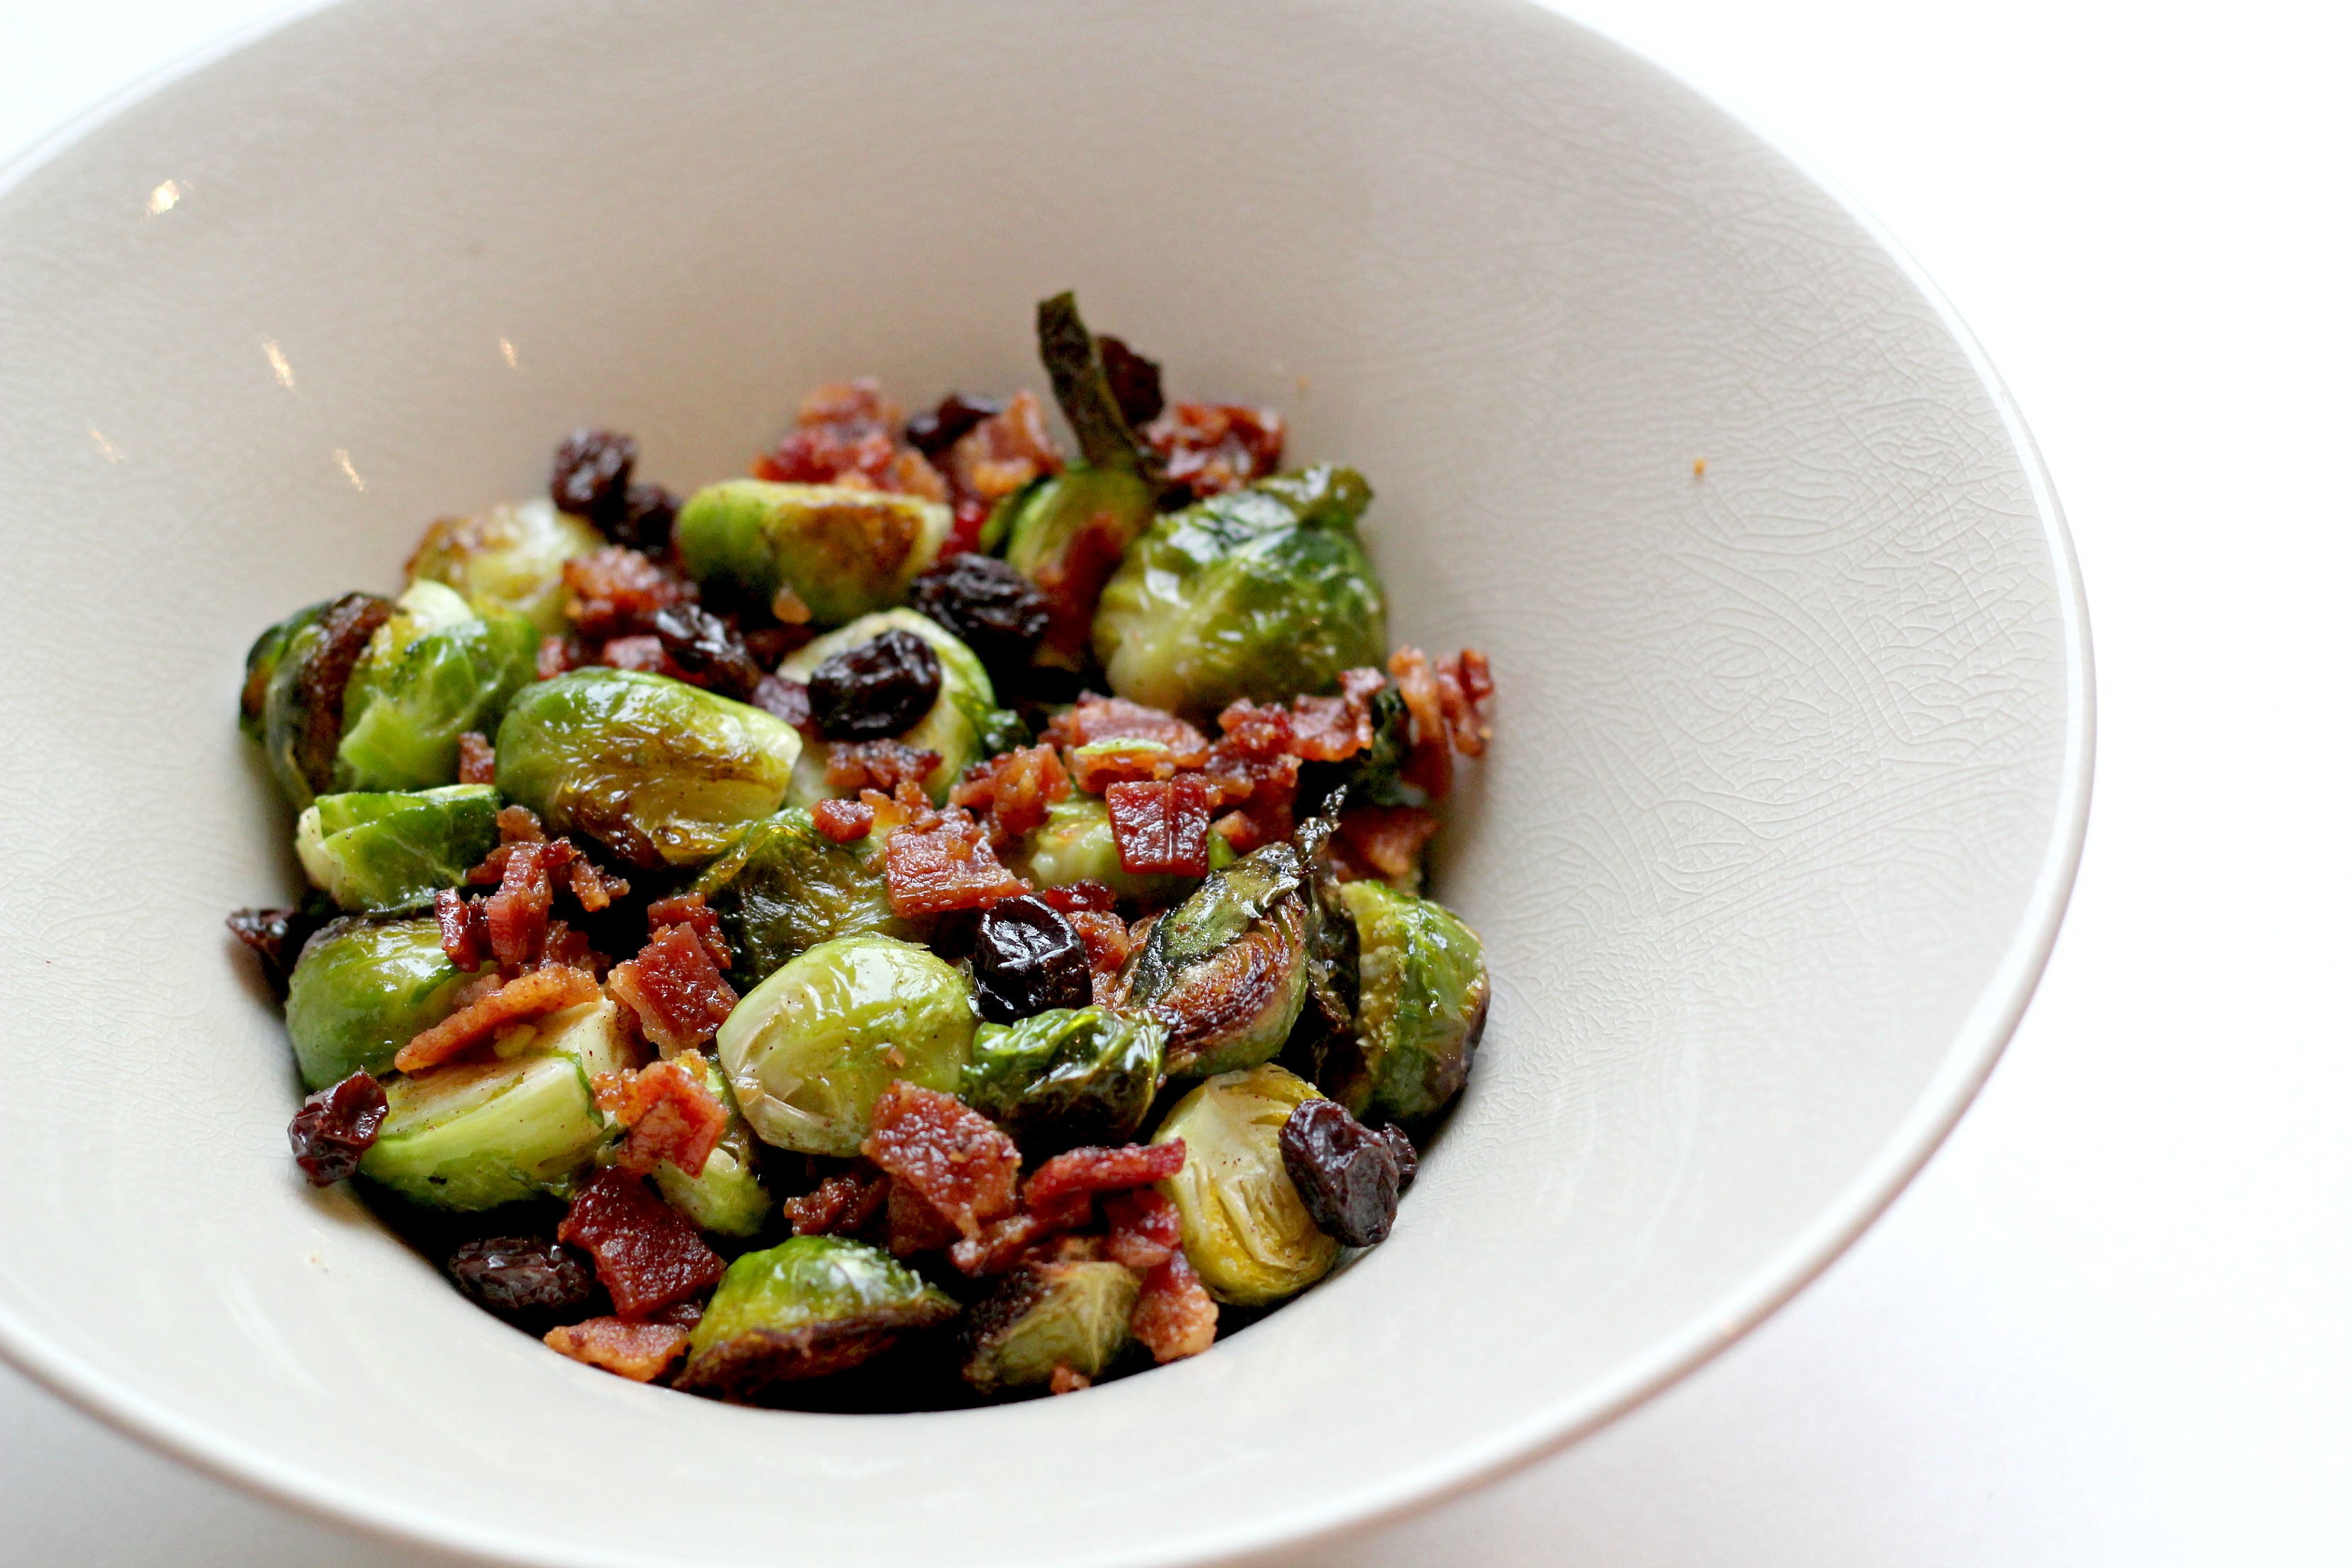 Roasted Brussel Sprouts with Bacon and Cinnamon – from The Healing Kitchen